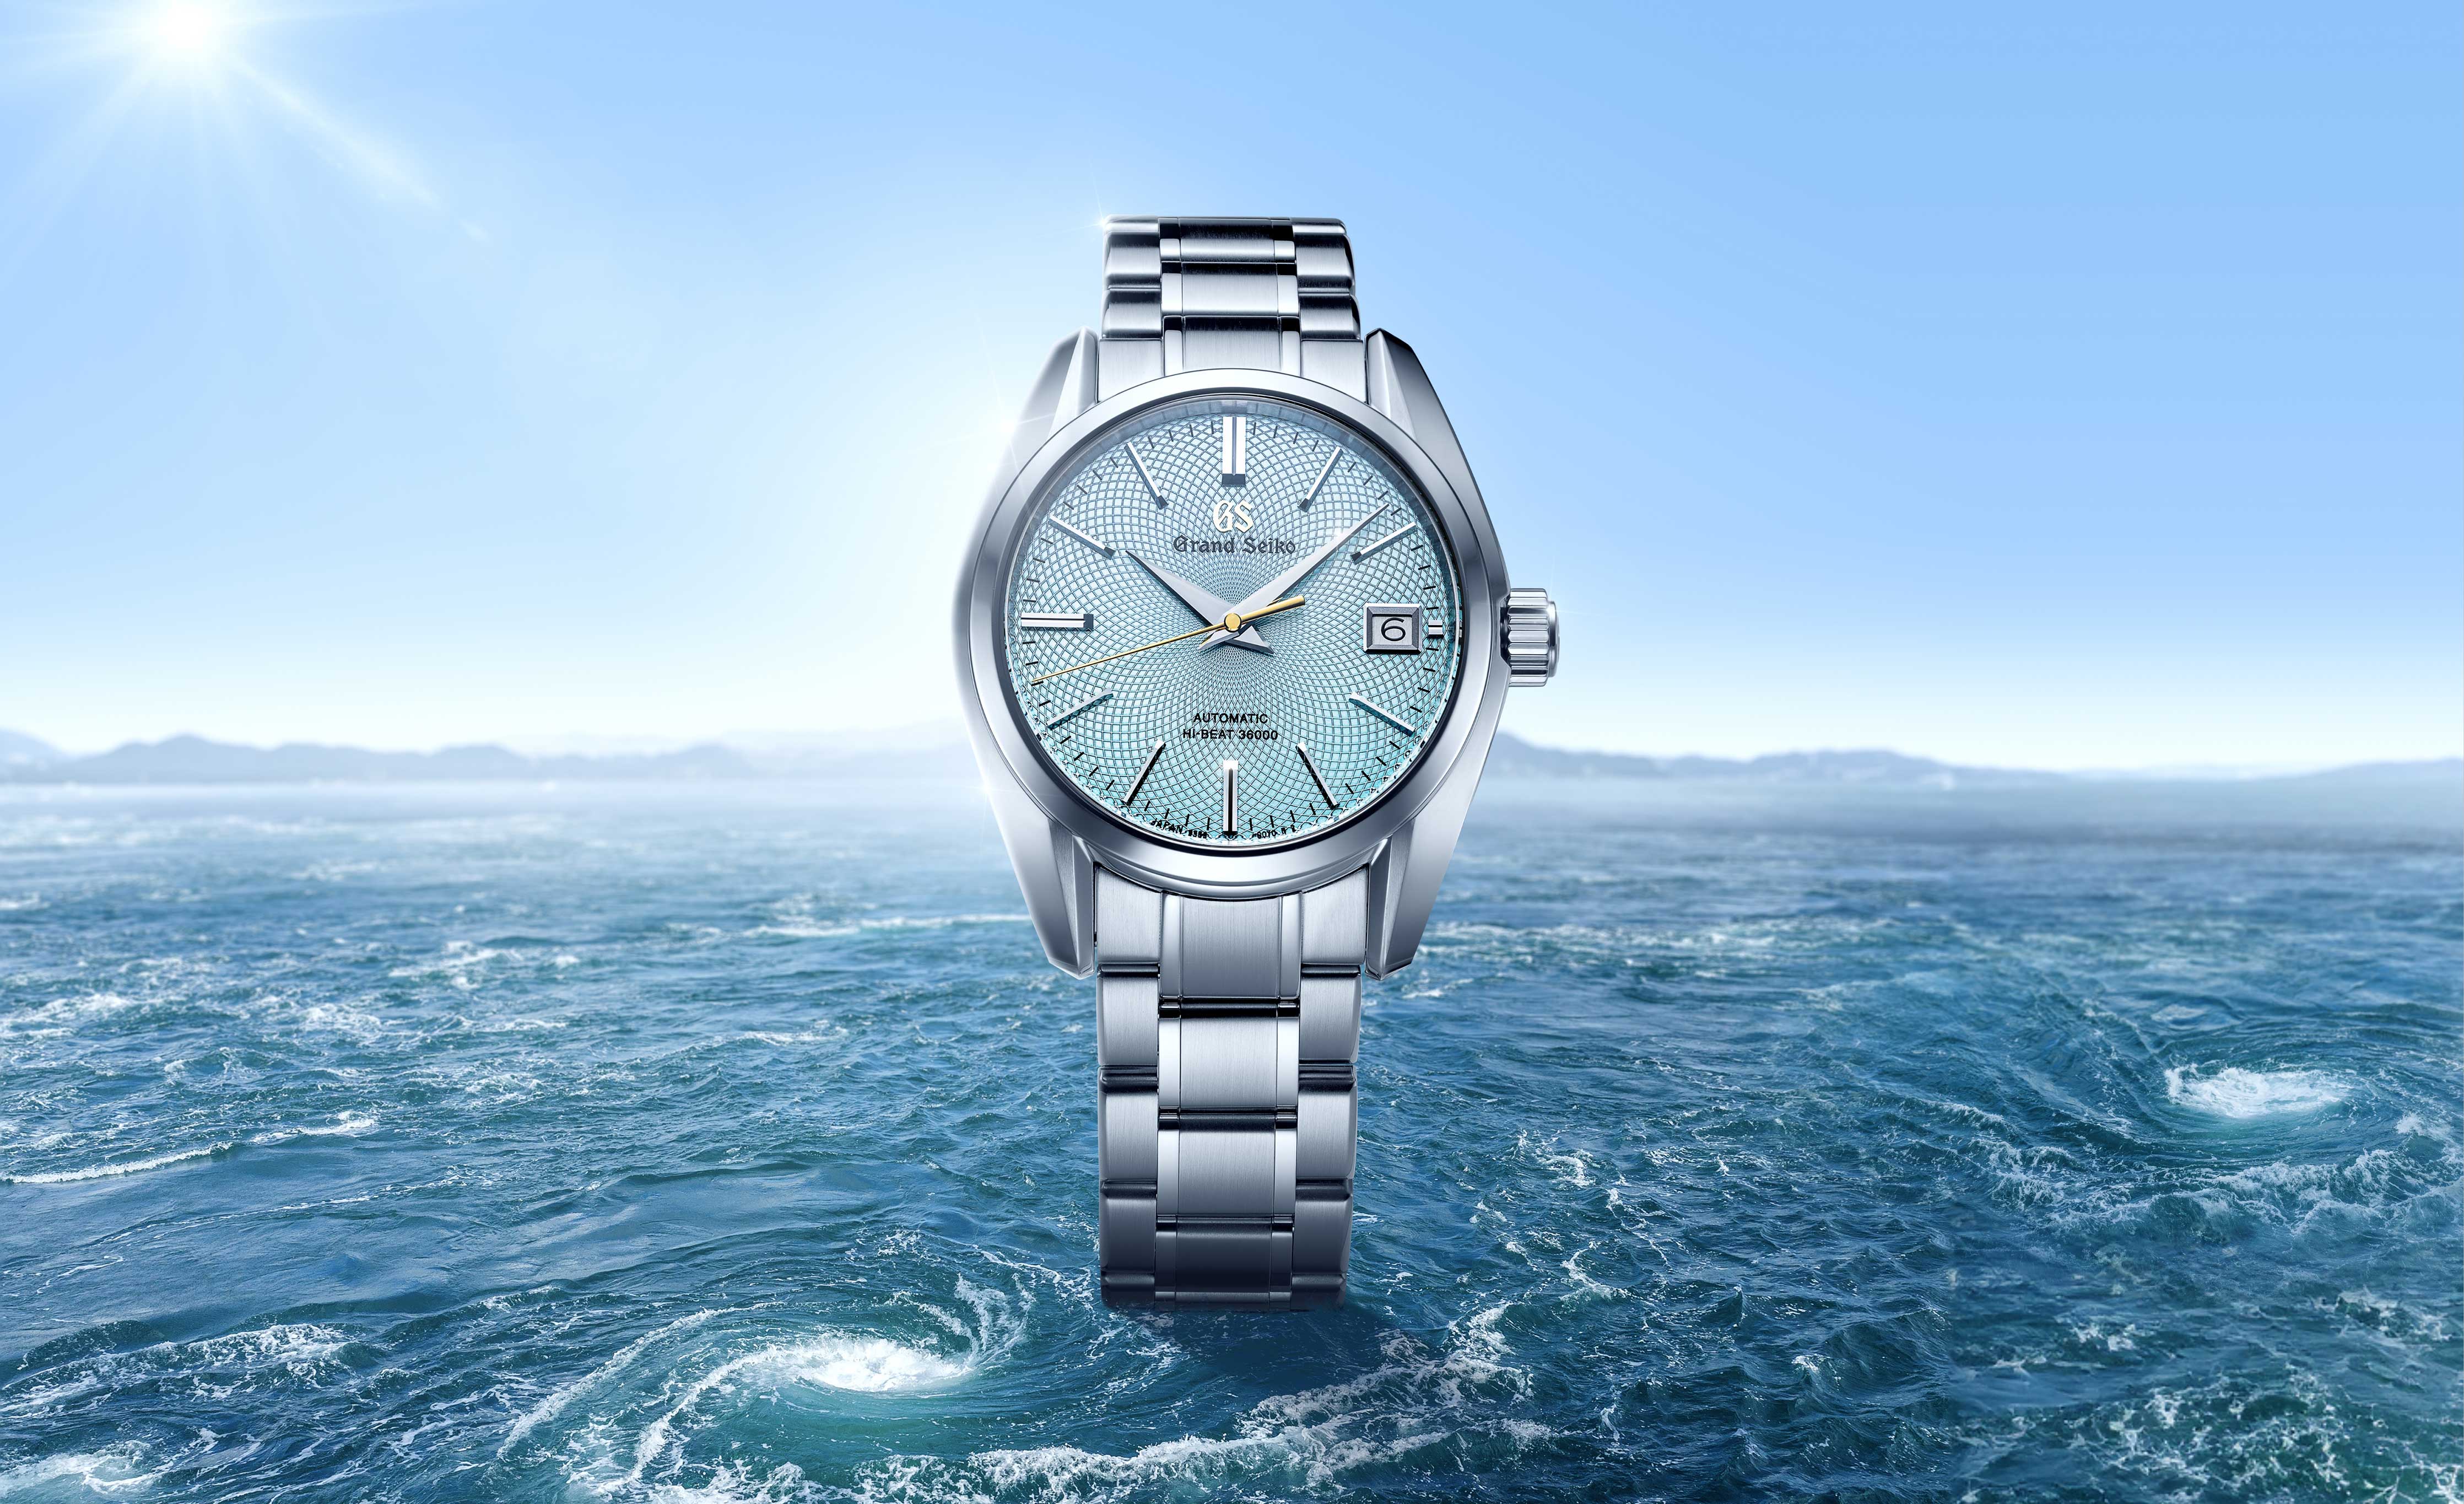 Introducing the Grand Seiko Limited Edition Inspired by Naruto’s Tidal Whirlpools